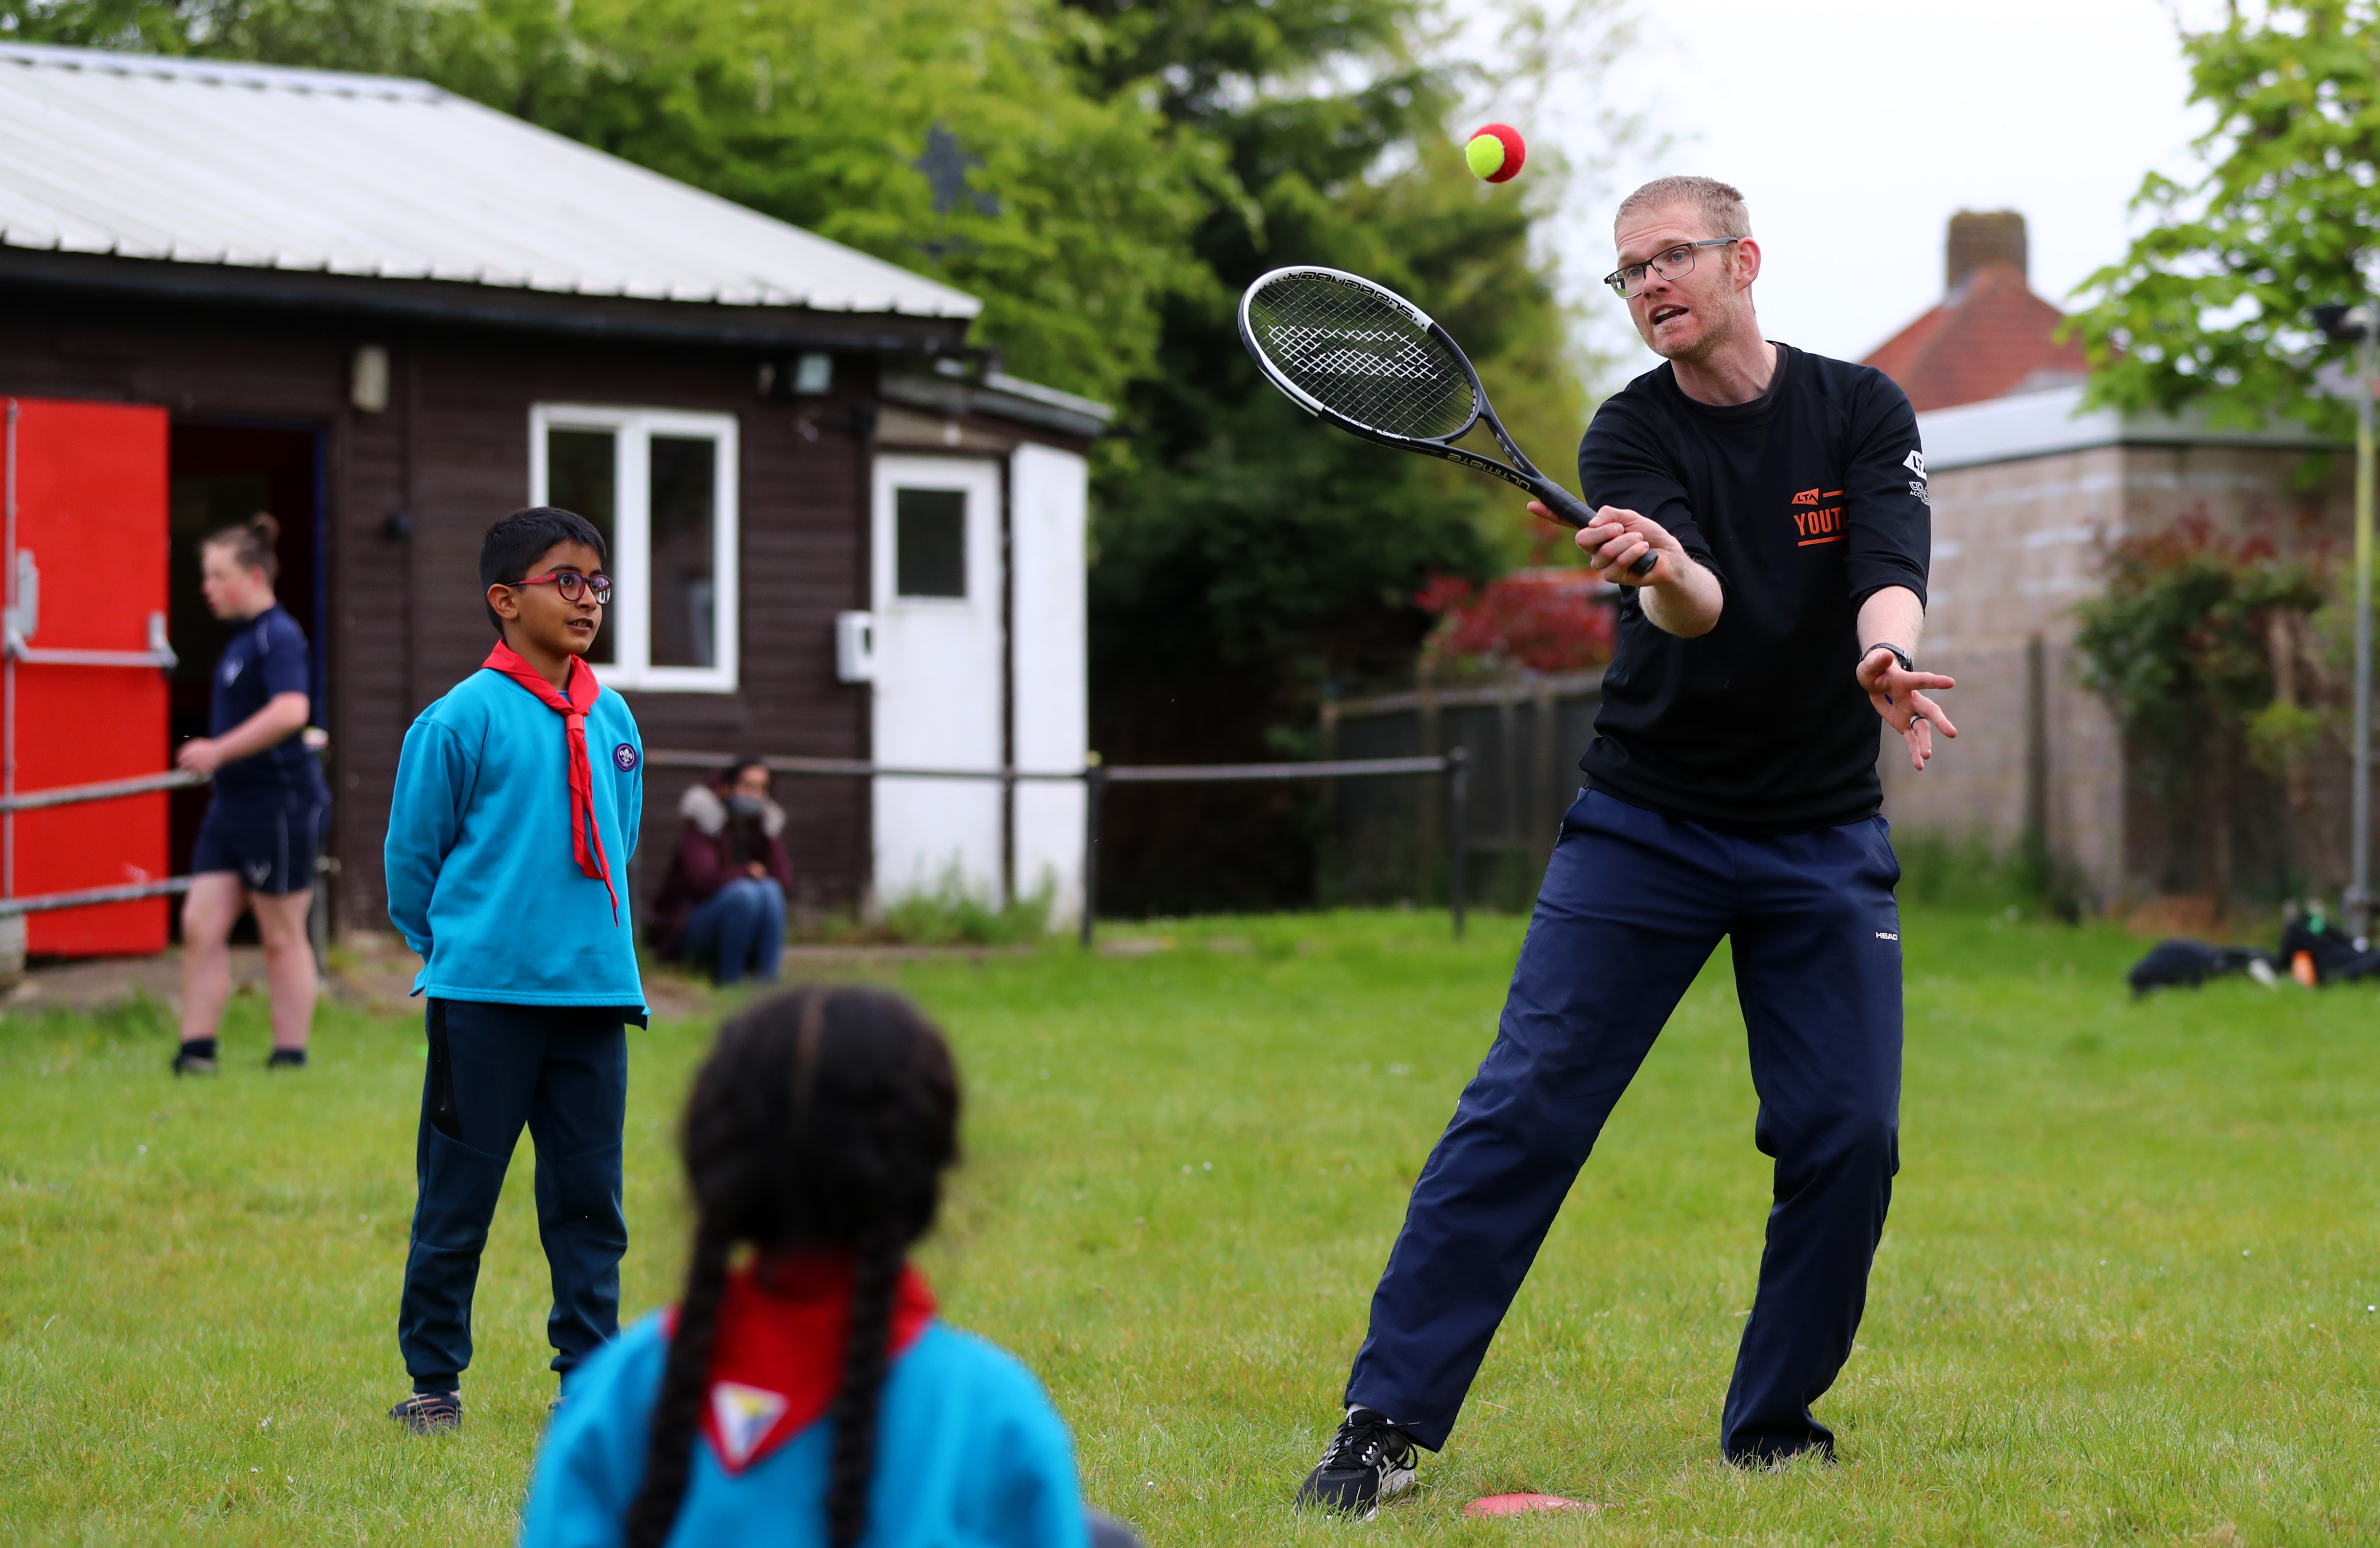 Beavers will learn basic tennis activities as part of a three-year partnership